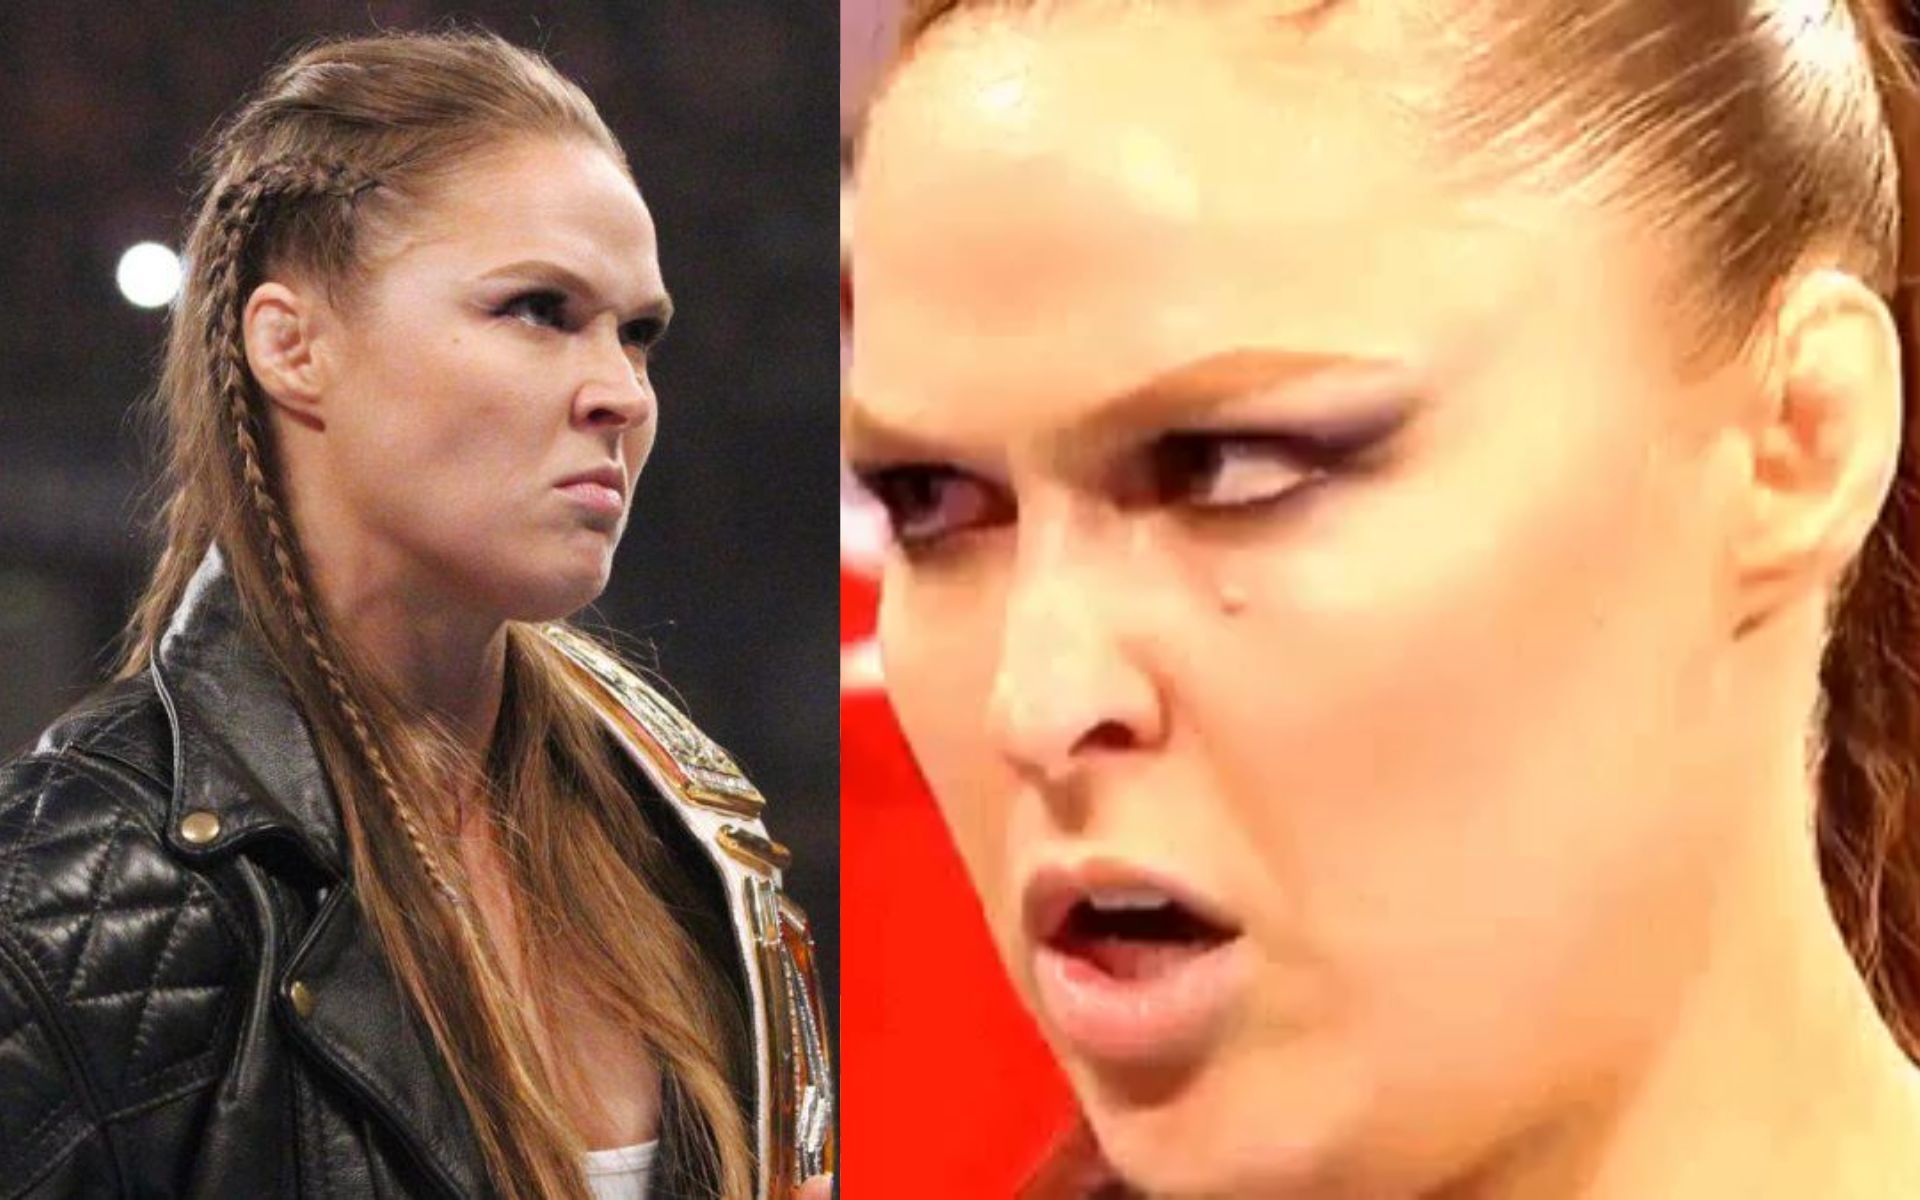 Ronda Rousey appears to have found an ally on SmackDown